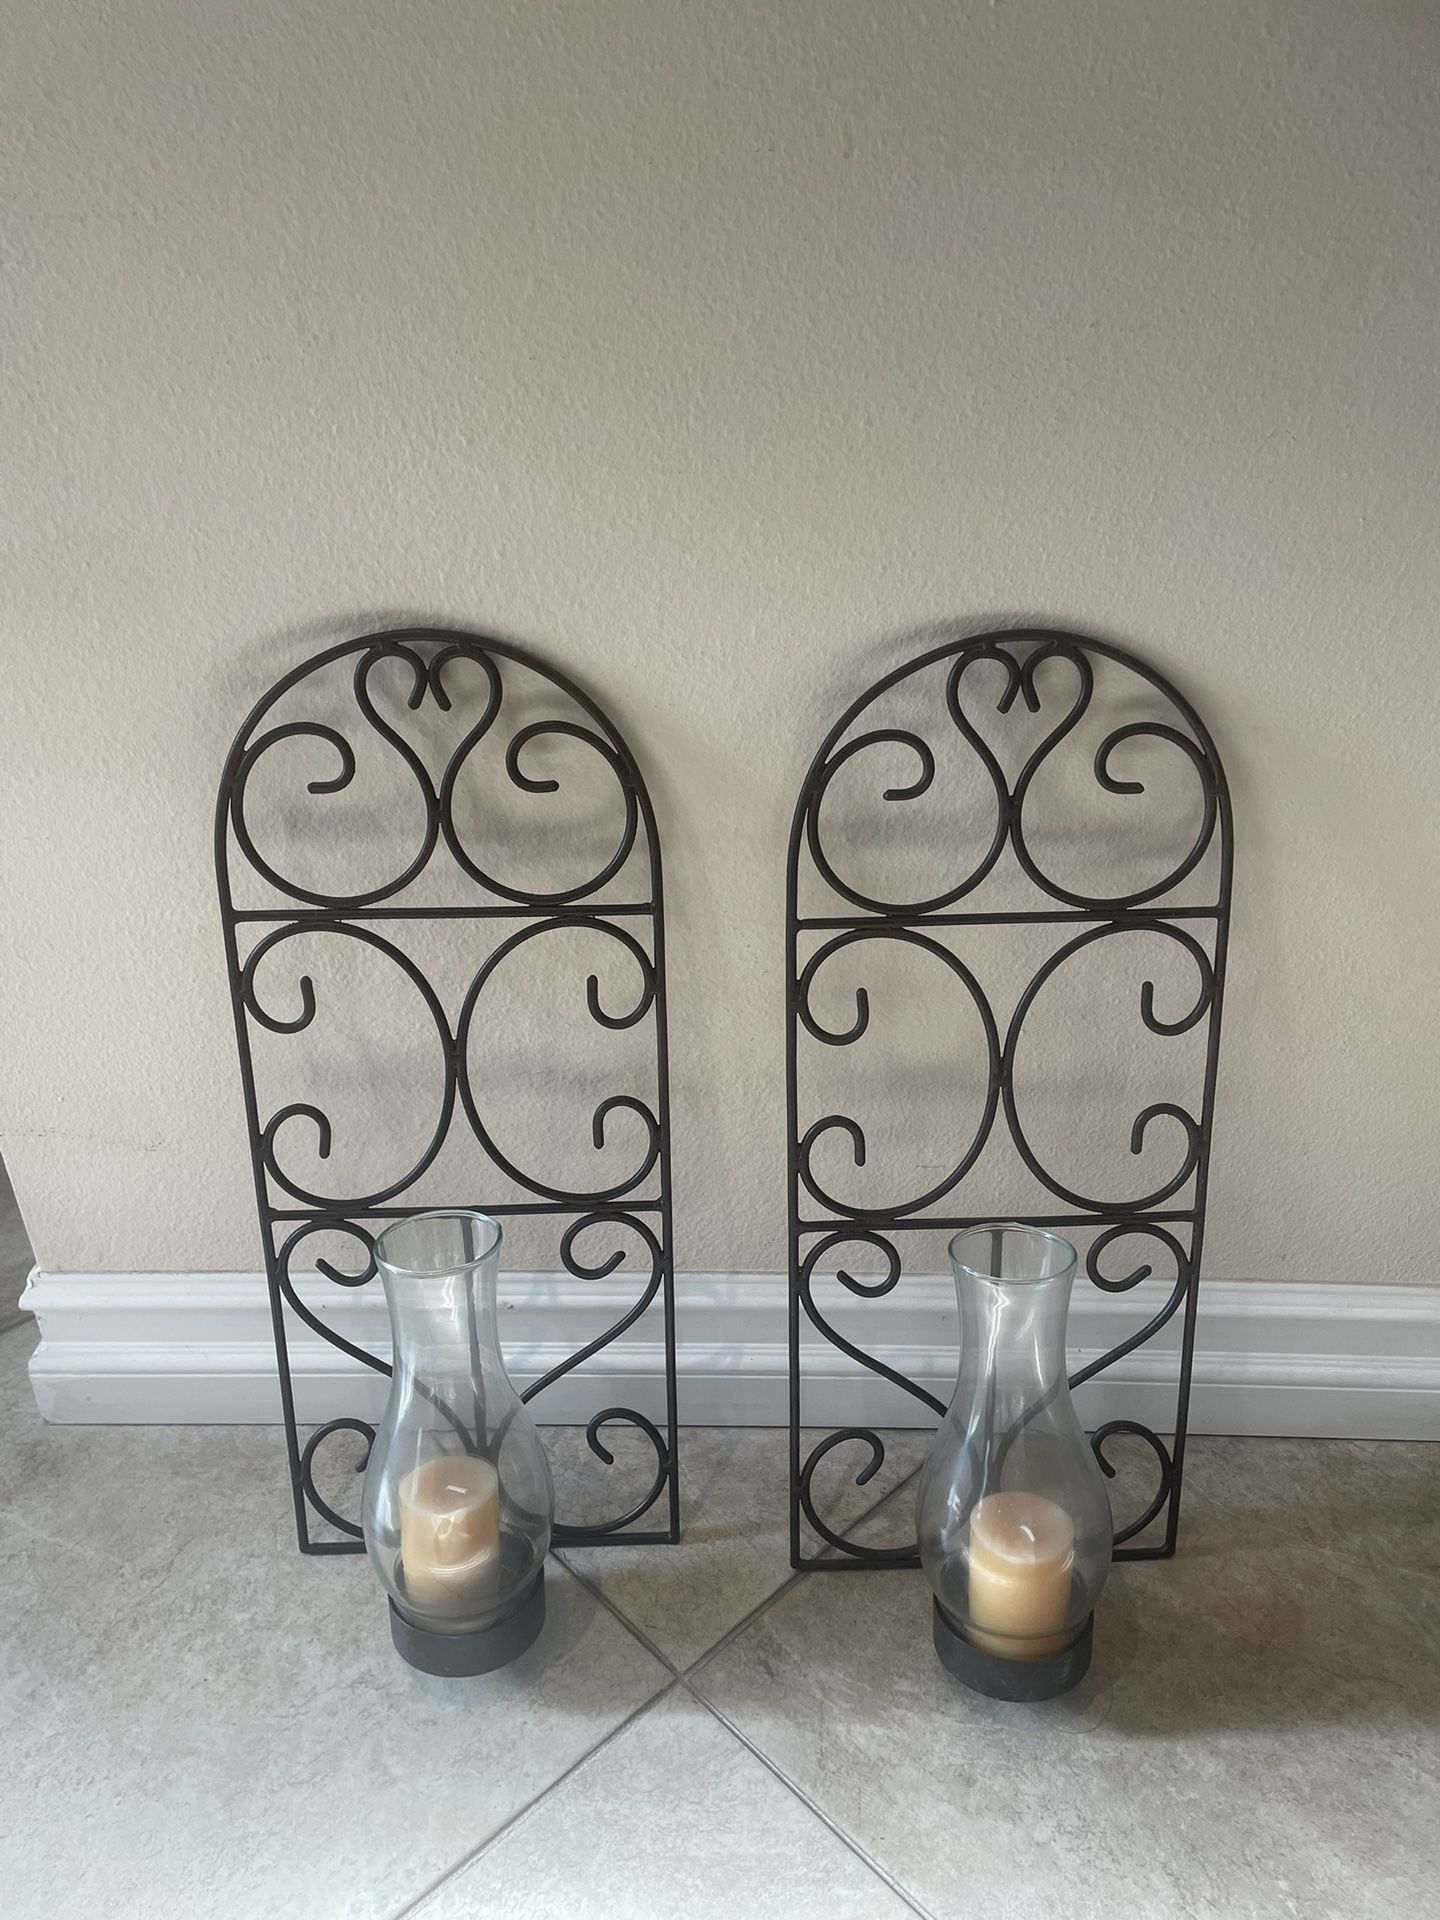 Set of 2 Wrought Iron Wall Sconce Pillar Candle Holders. 